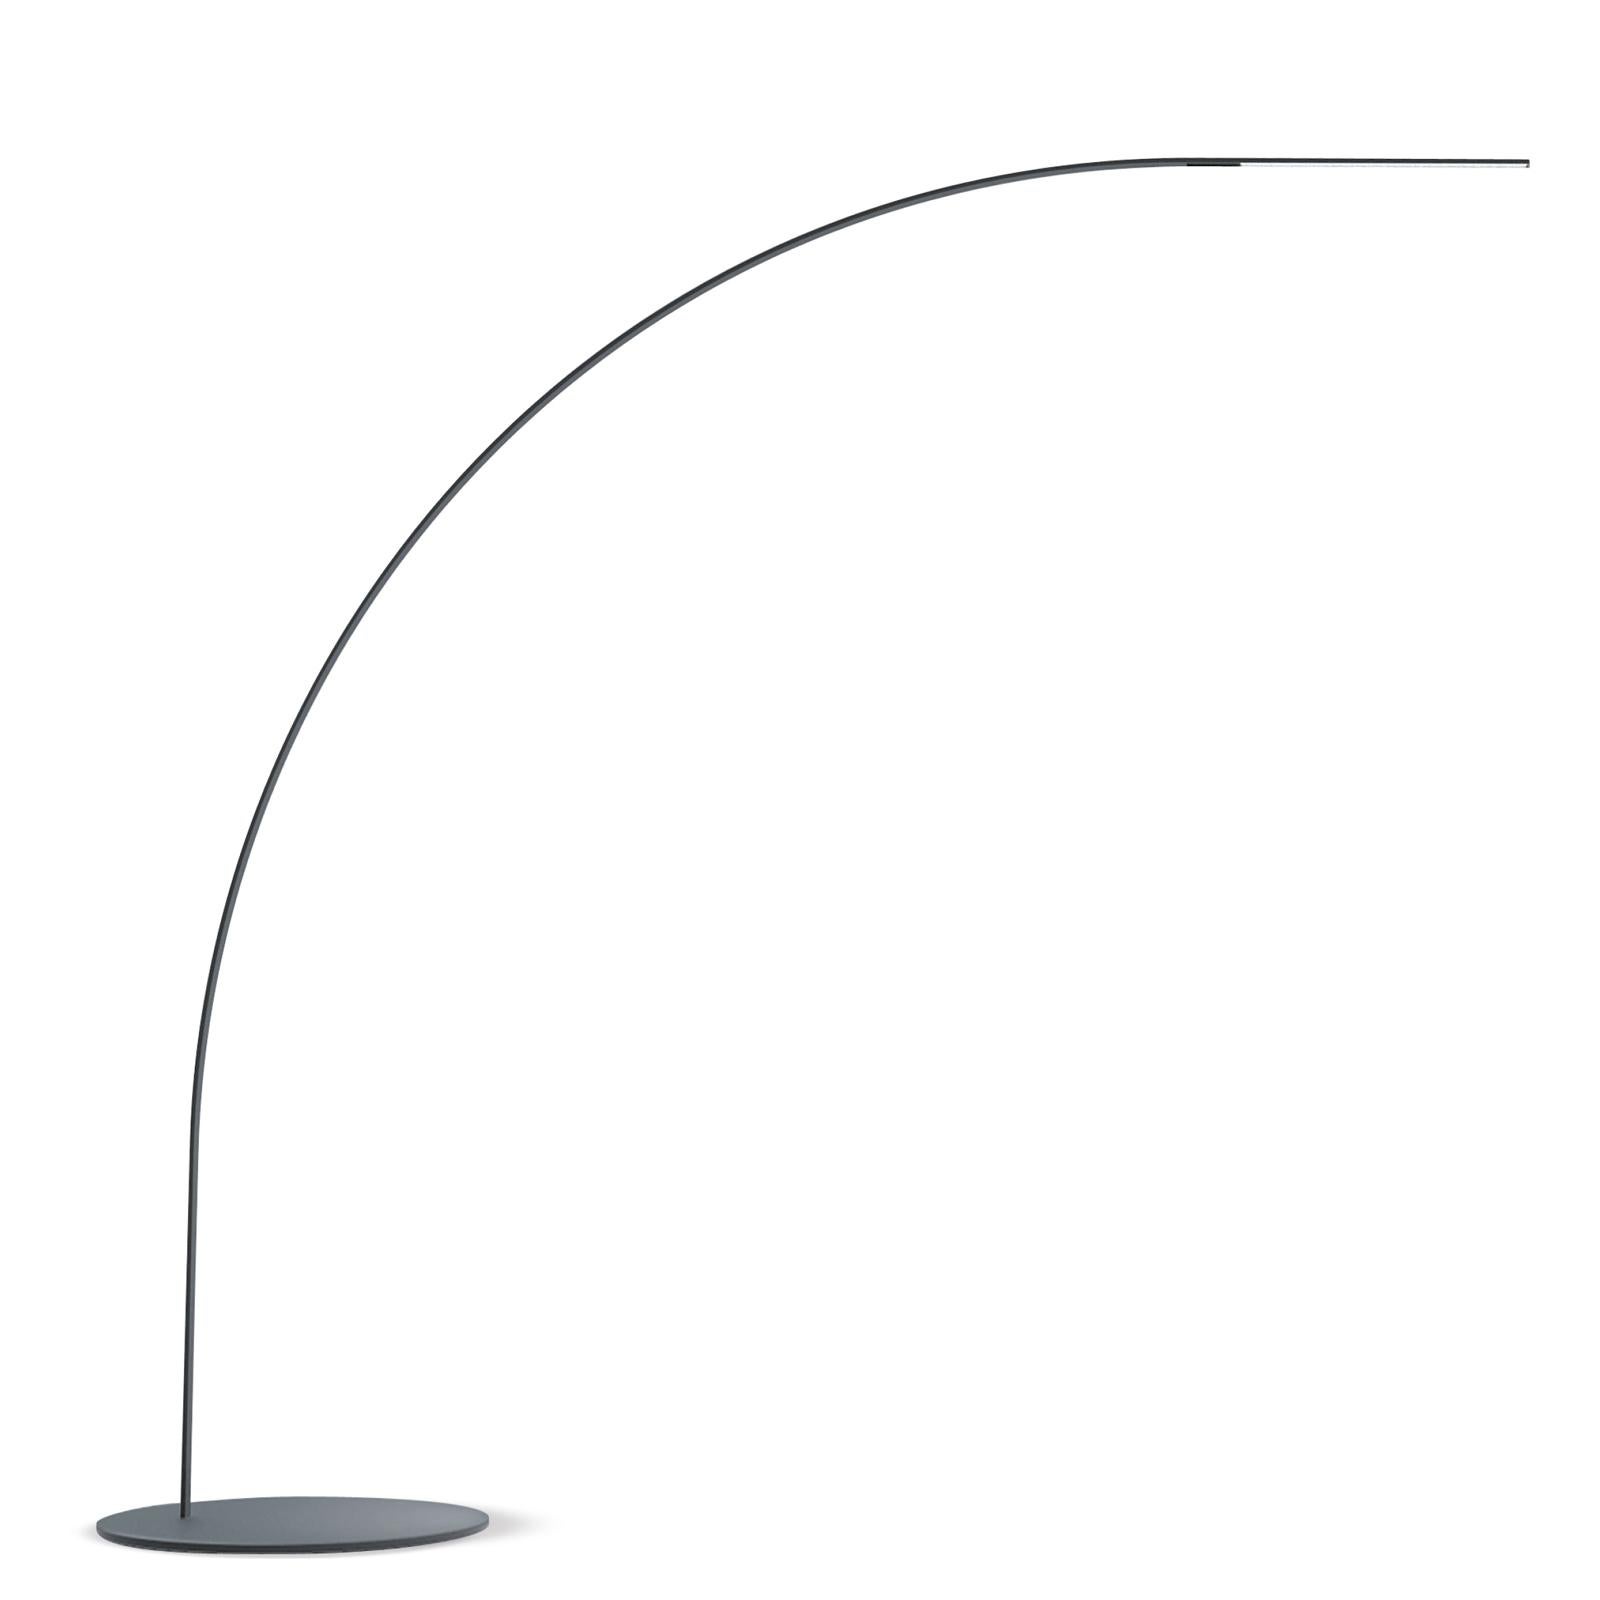 Absolute synthesis destined to become a new universal Classic.
Essential design meets a sturdy lightweight structure in a composite of fiberglass and carbon fiber.
The 170 dimmable Leds that are part of the lamp structure mean it takes
up very